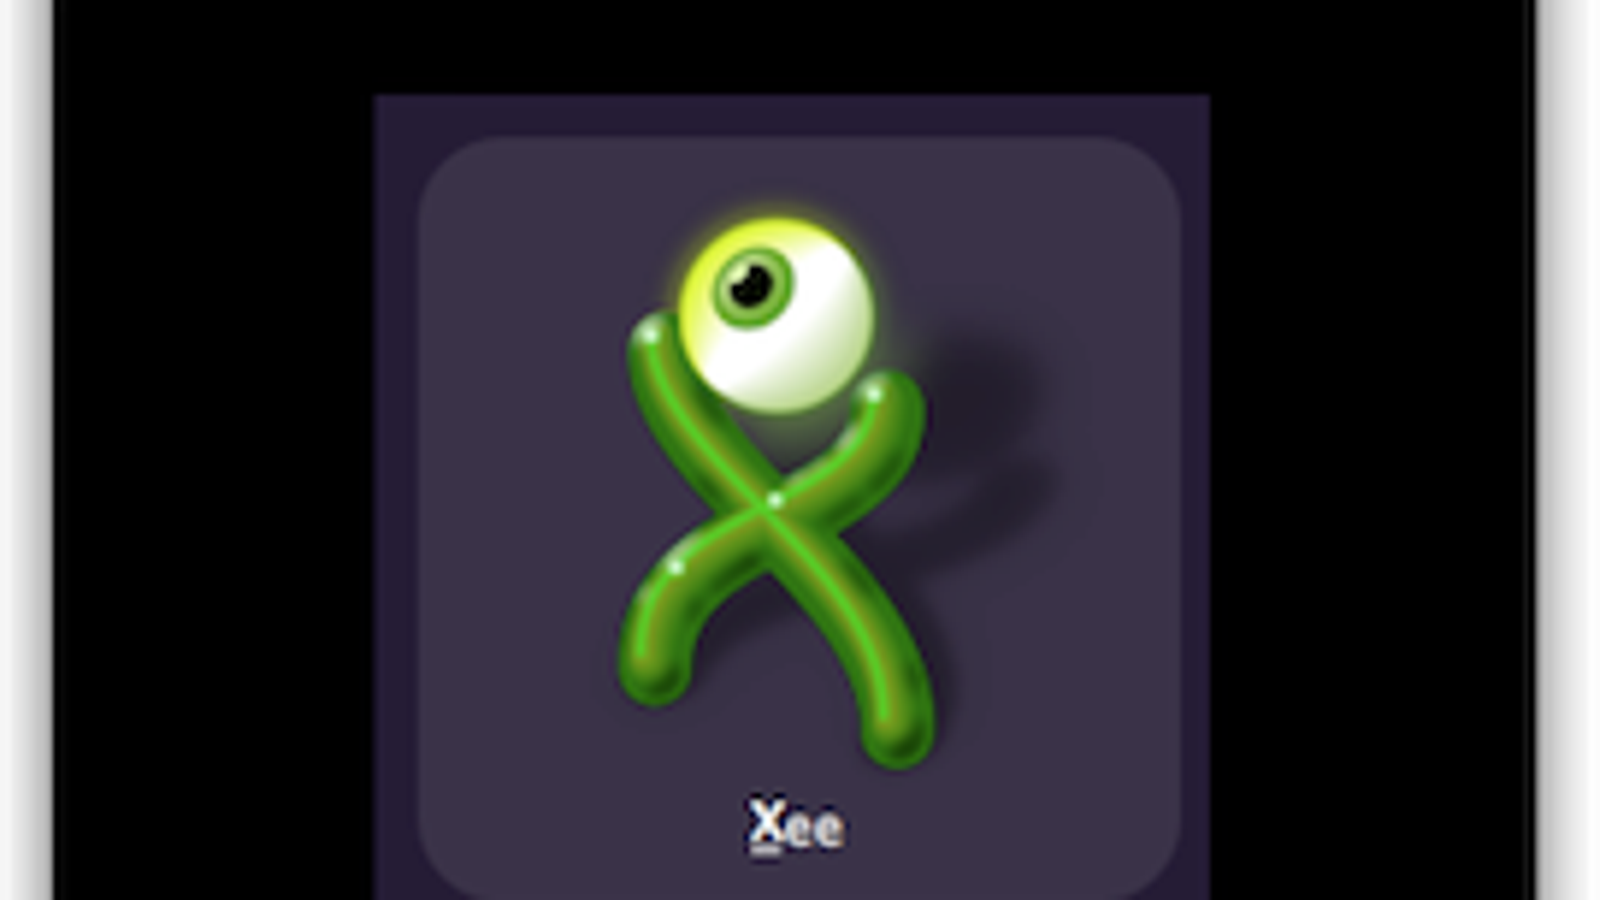 xee for mac photo viewer software review